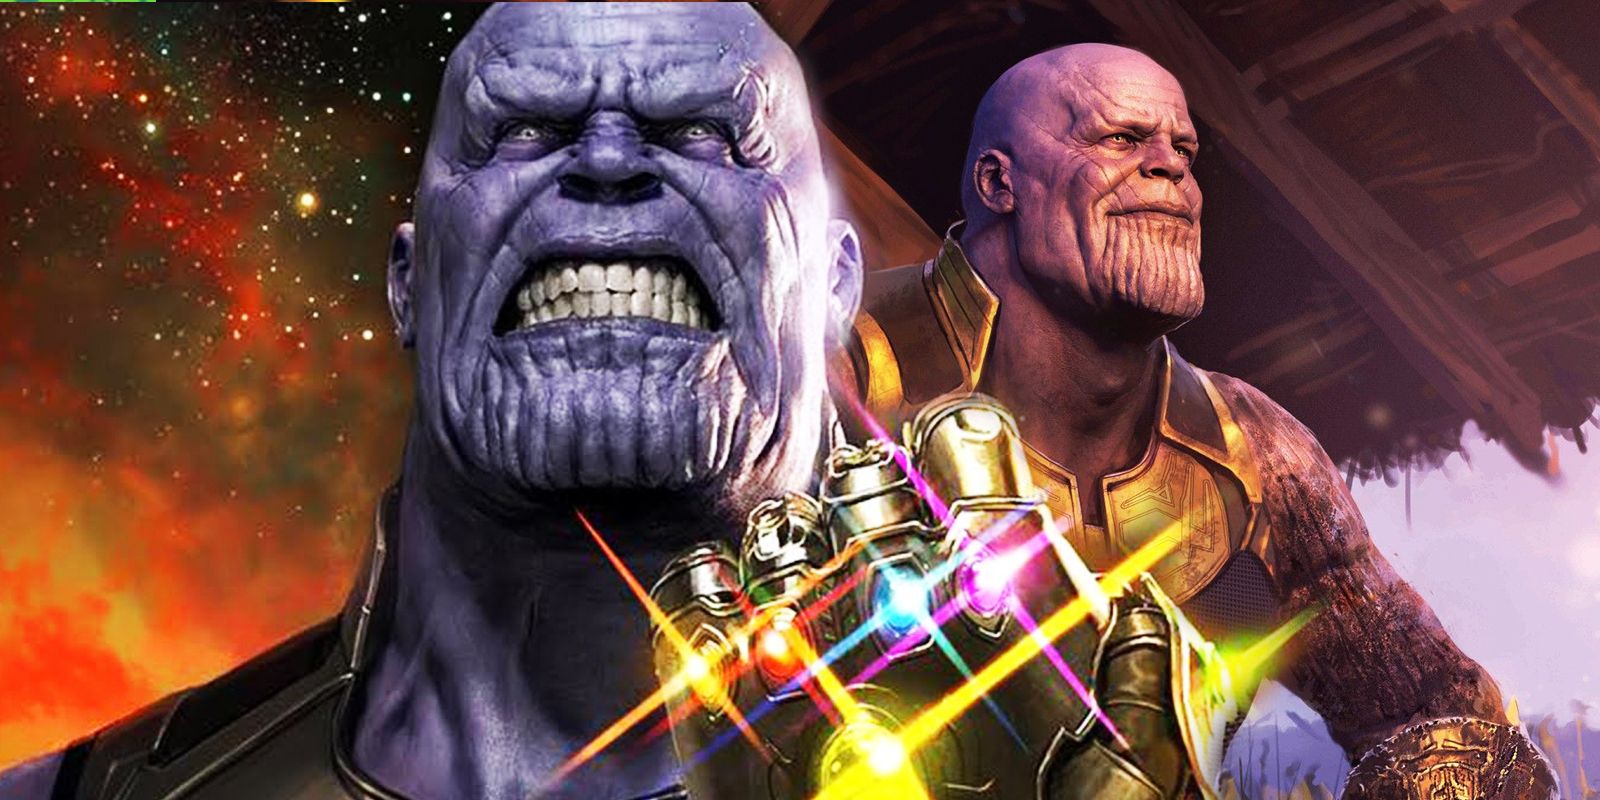 Why the Infinity Stones Changed Color (It Was Thanos Fault)